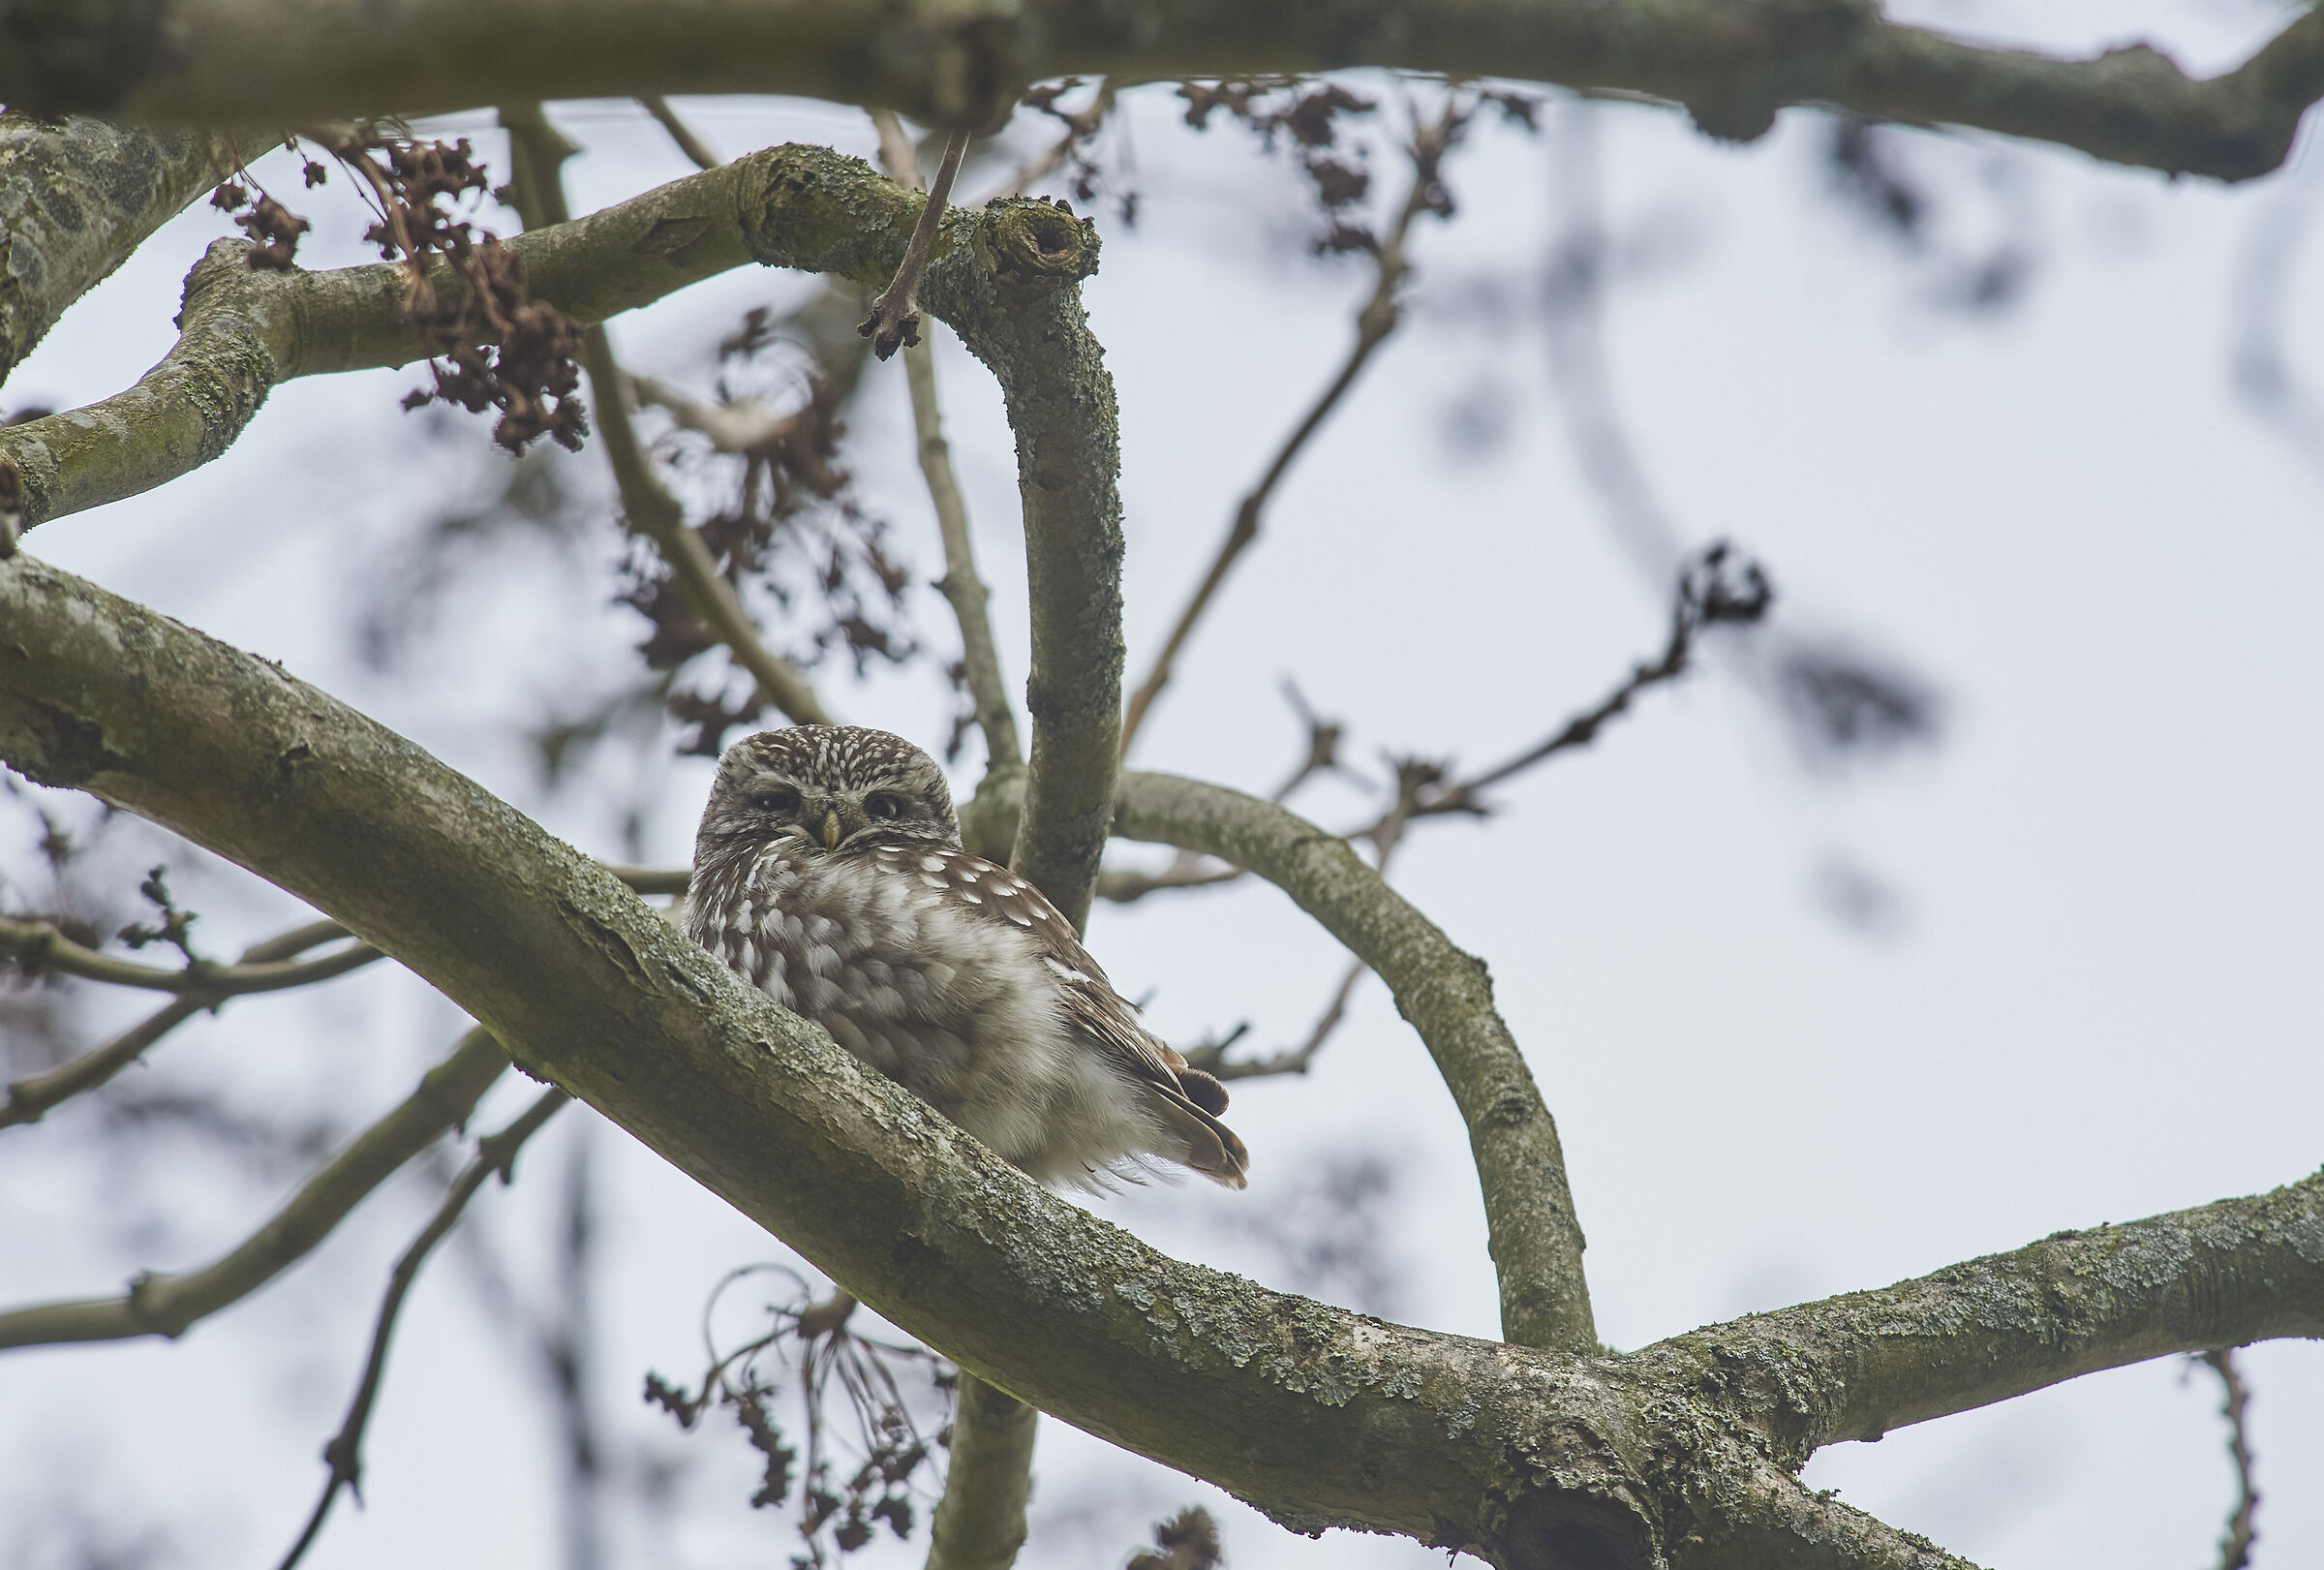 Little Owl in bad light conditions...